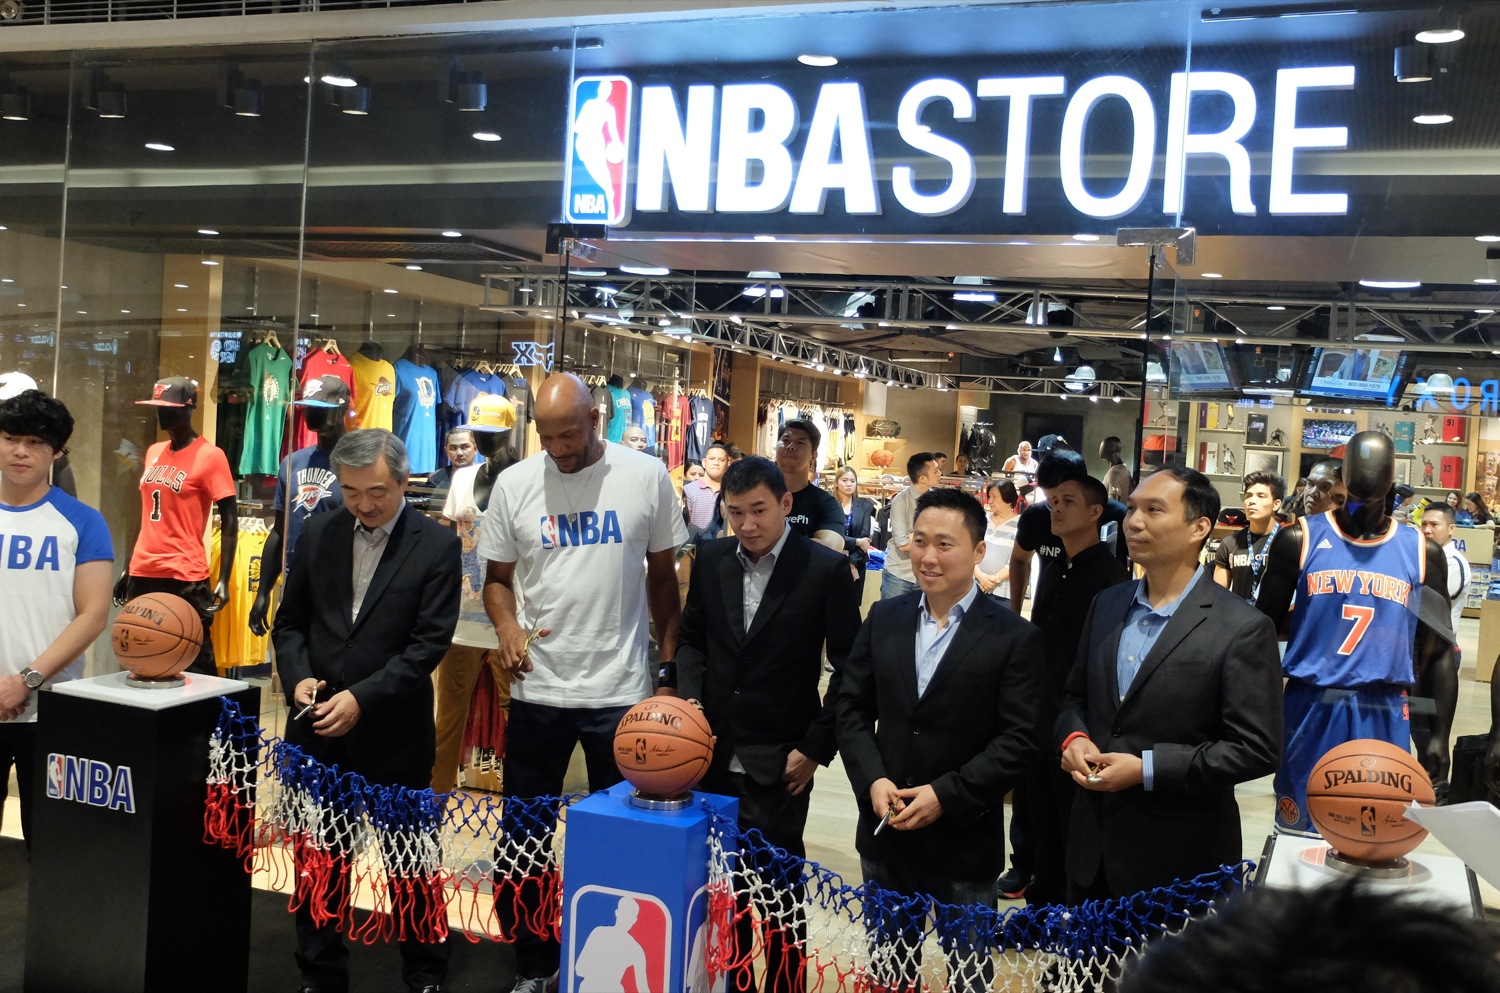 Third NBA Store opens in the PH